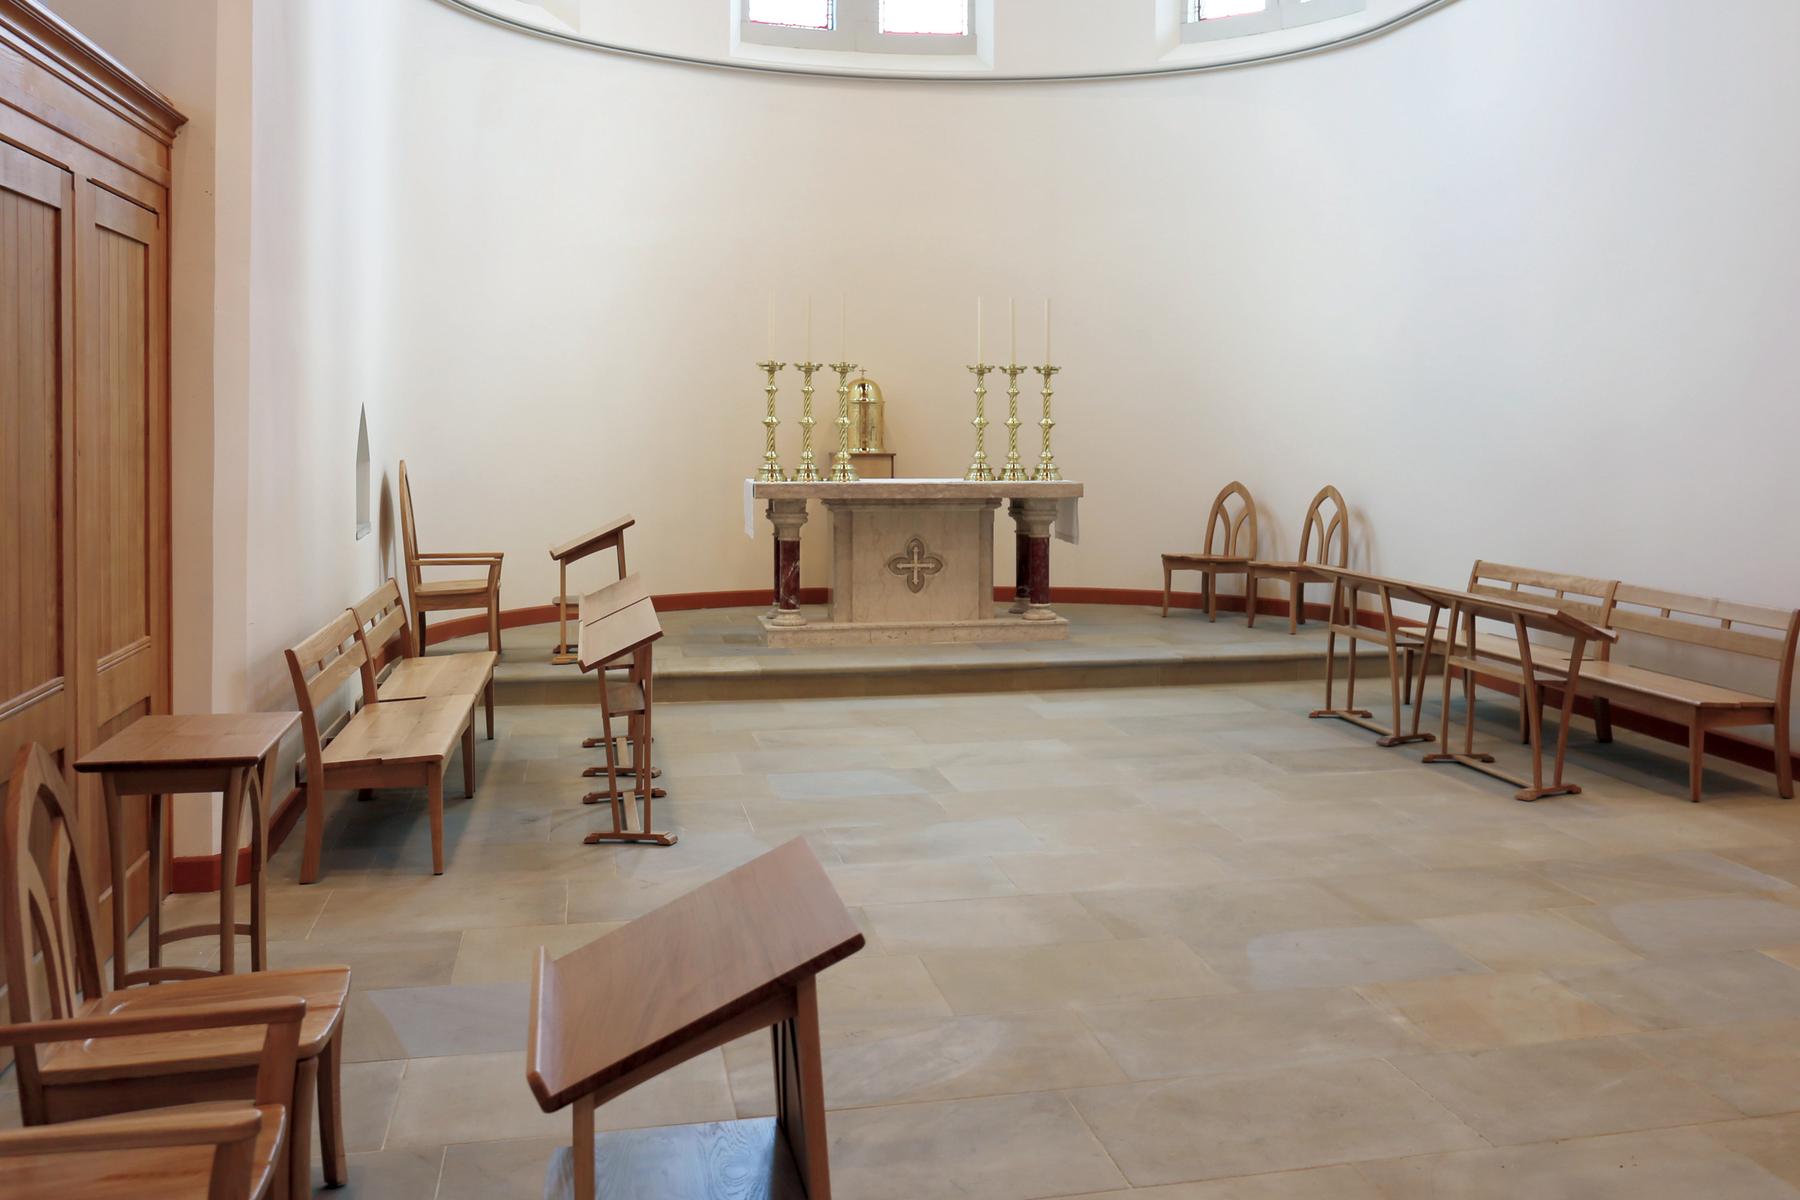 Church of the Ascension Chancel